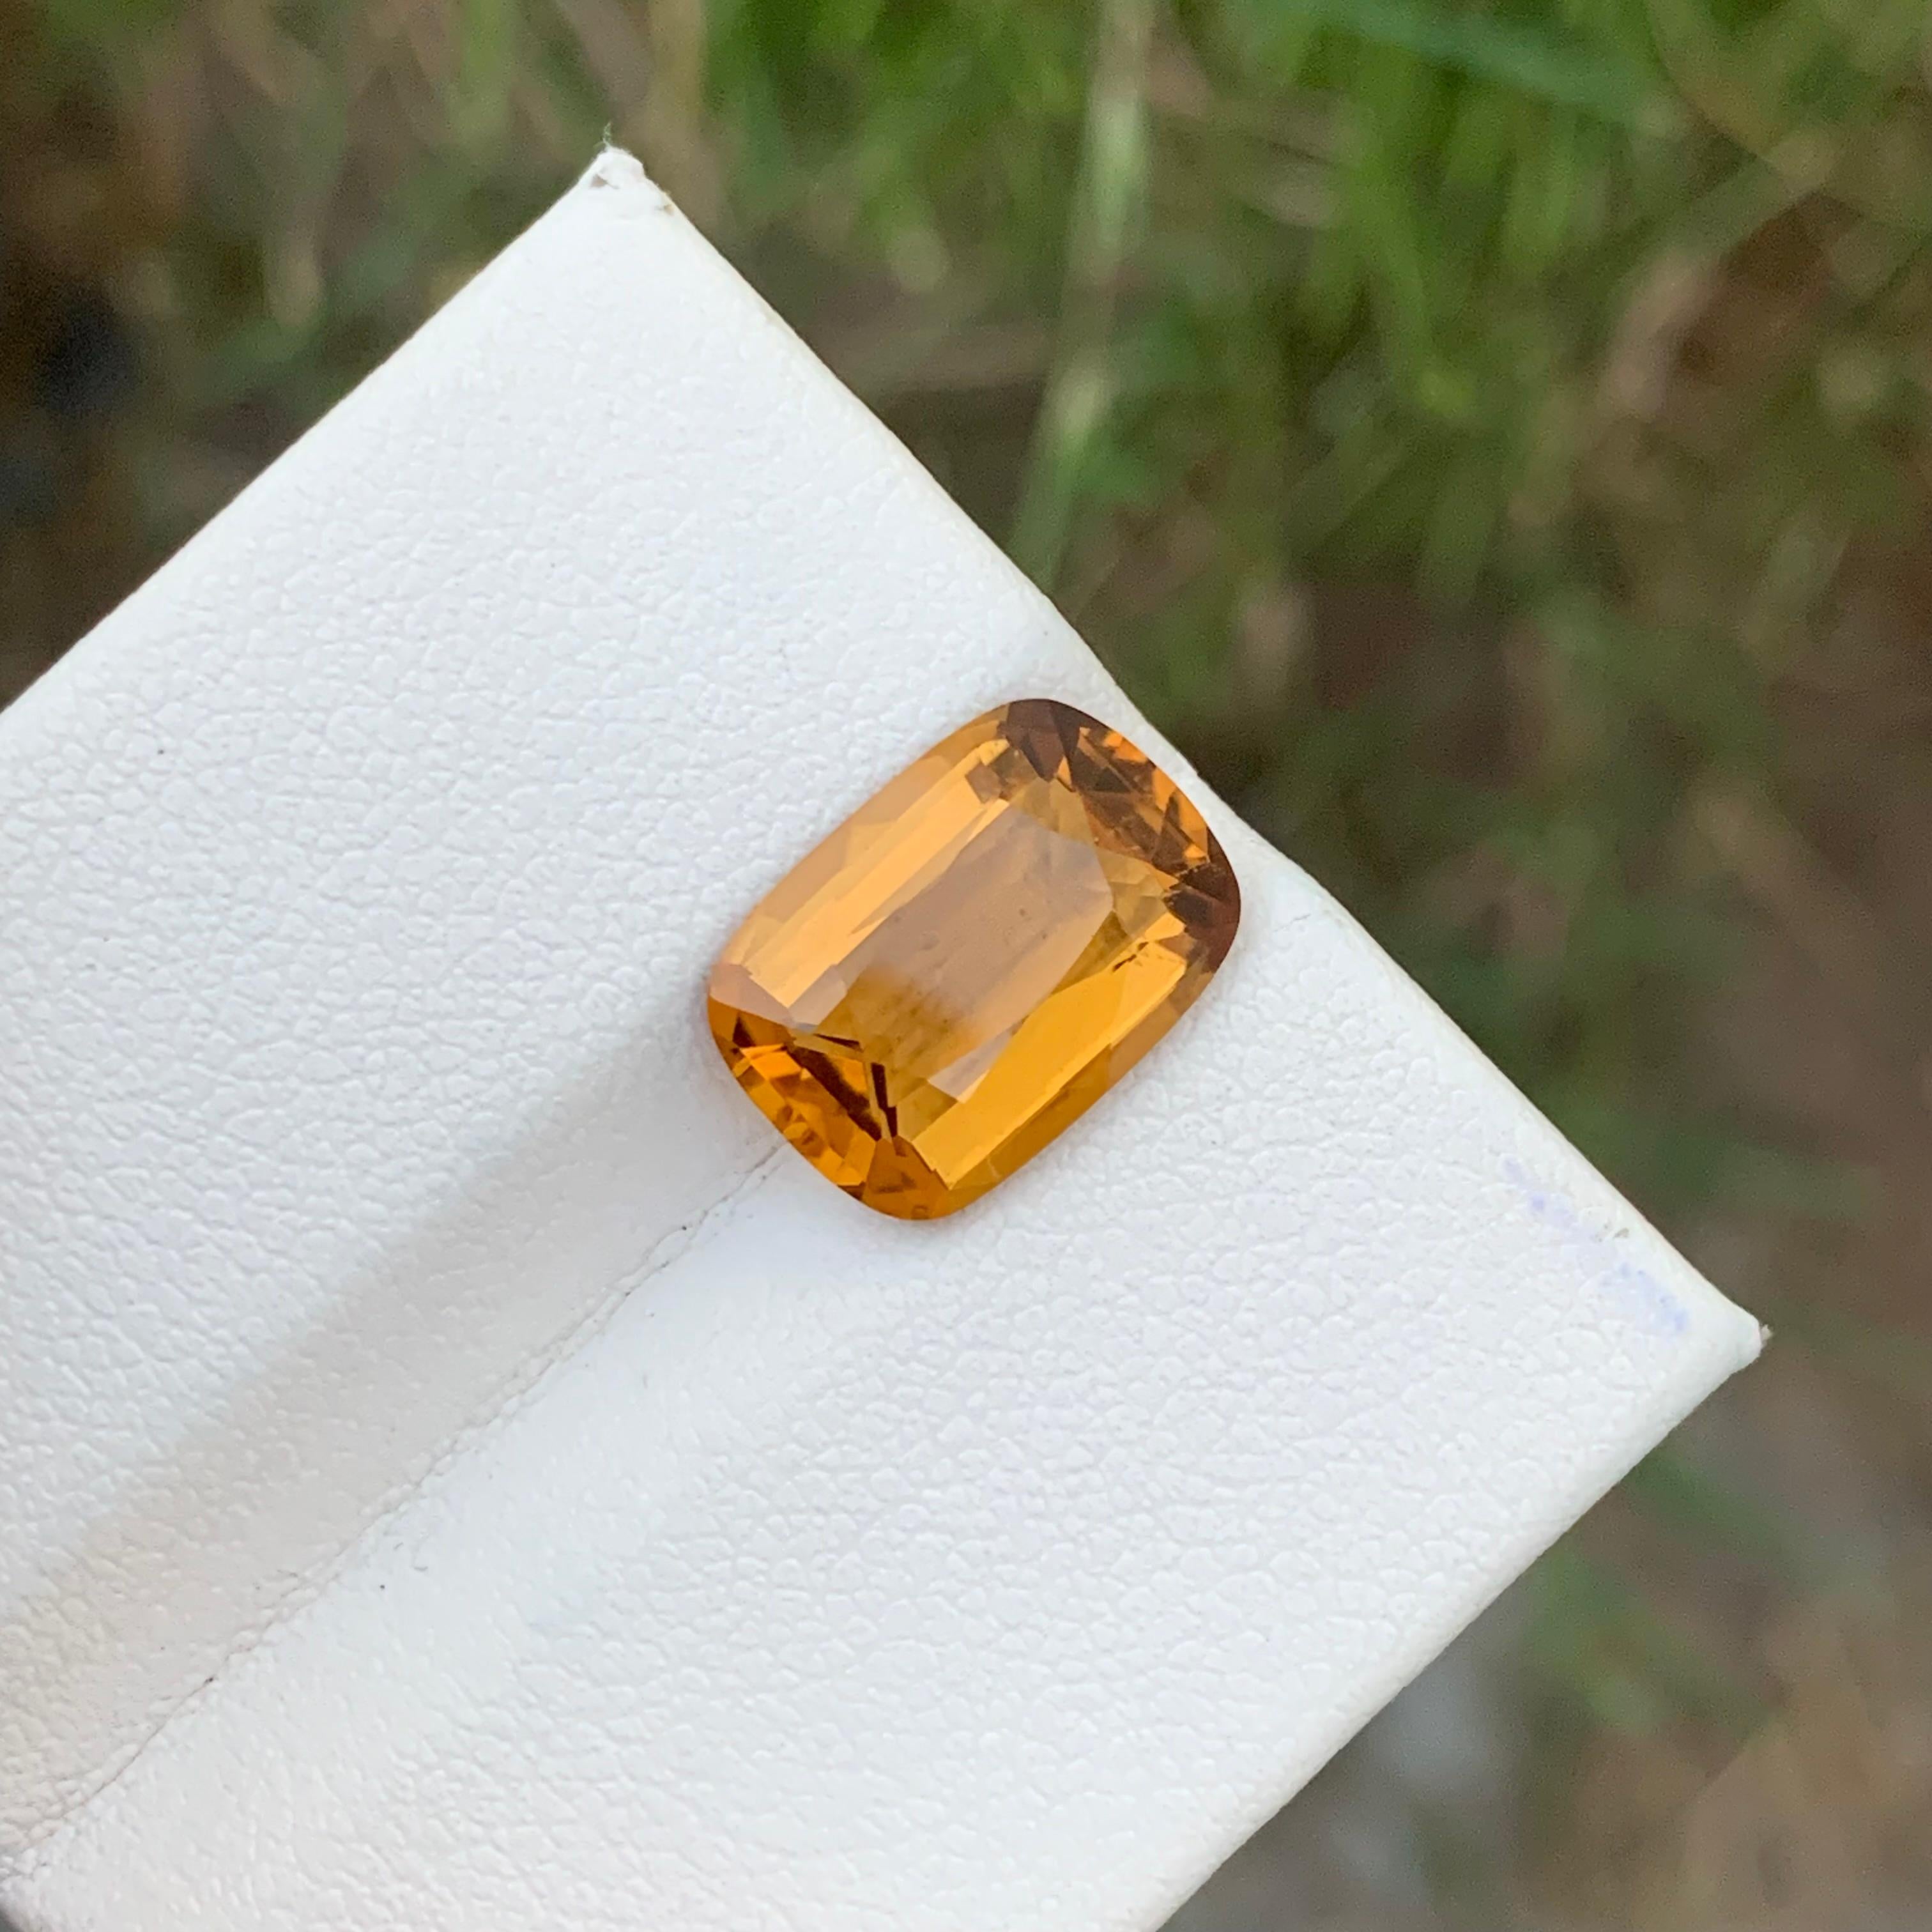 Loose Citrine
Weight: 4.60 Carats 
Dimension: 13.1x9.4x5.7 Mm
Origin: Braz
Shape: Cushion
Color: Yellow 
Citrine, often referred to as the 